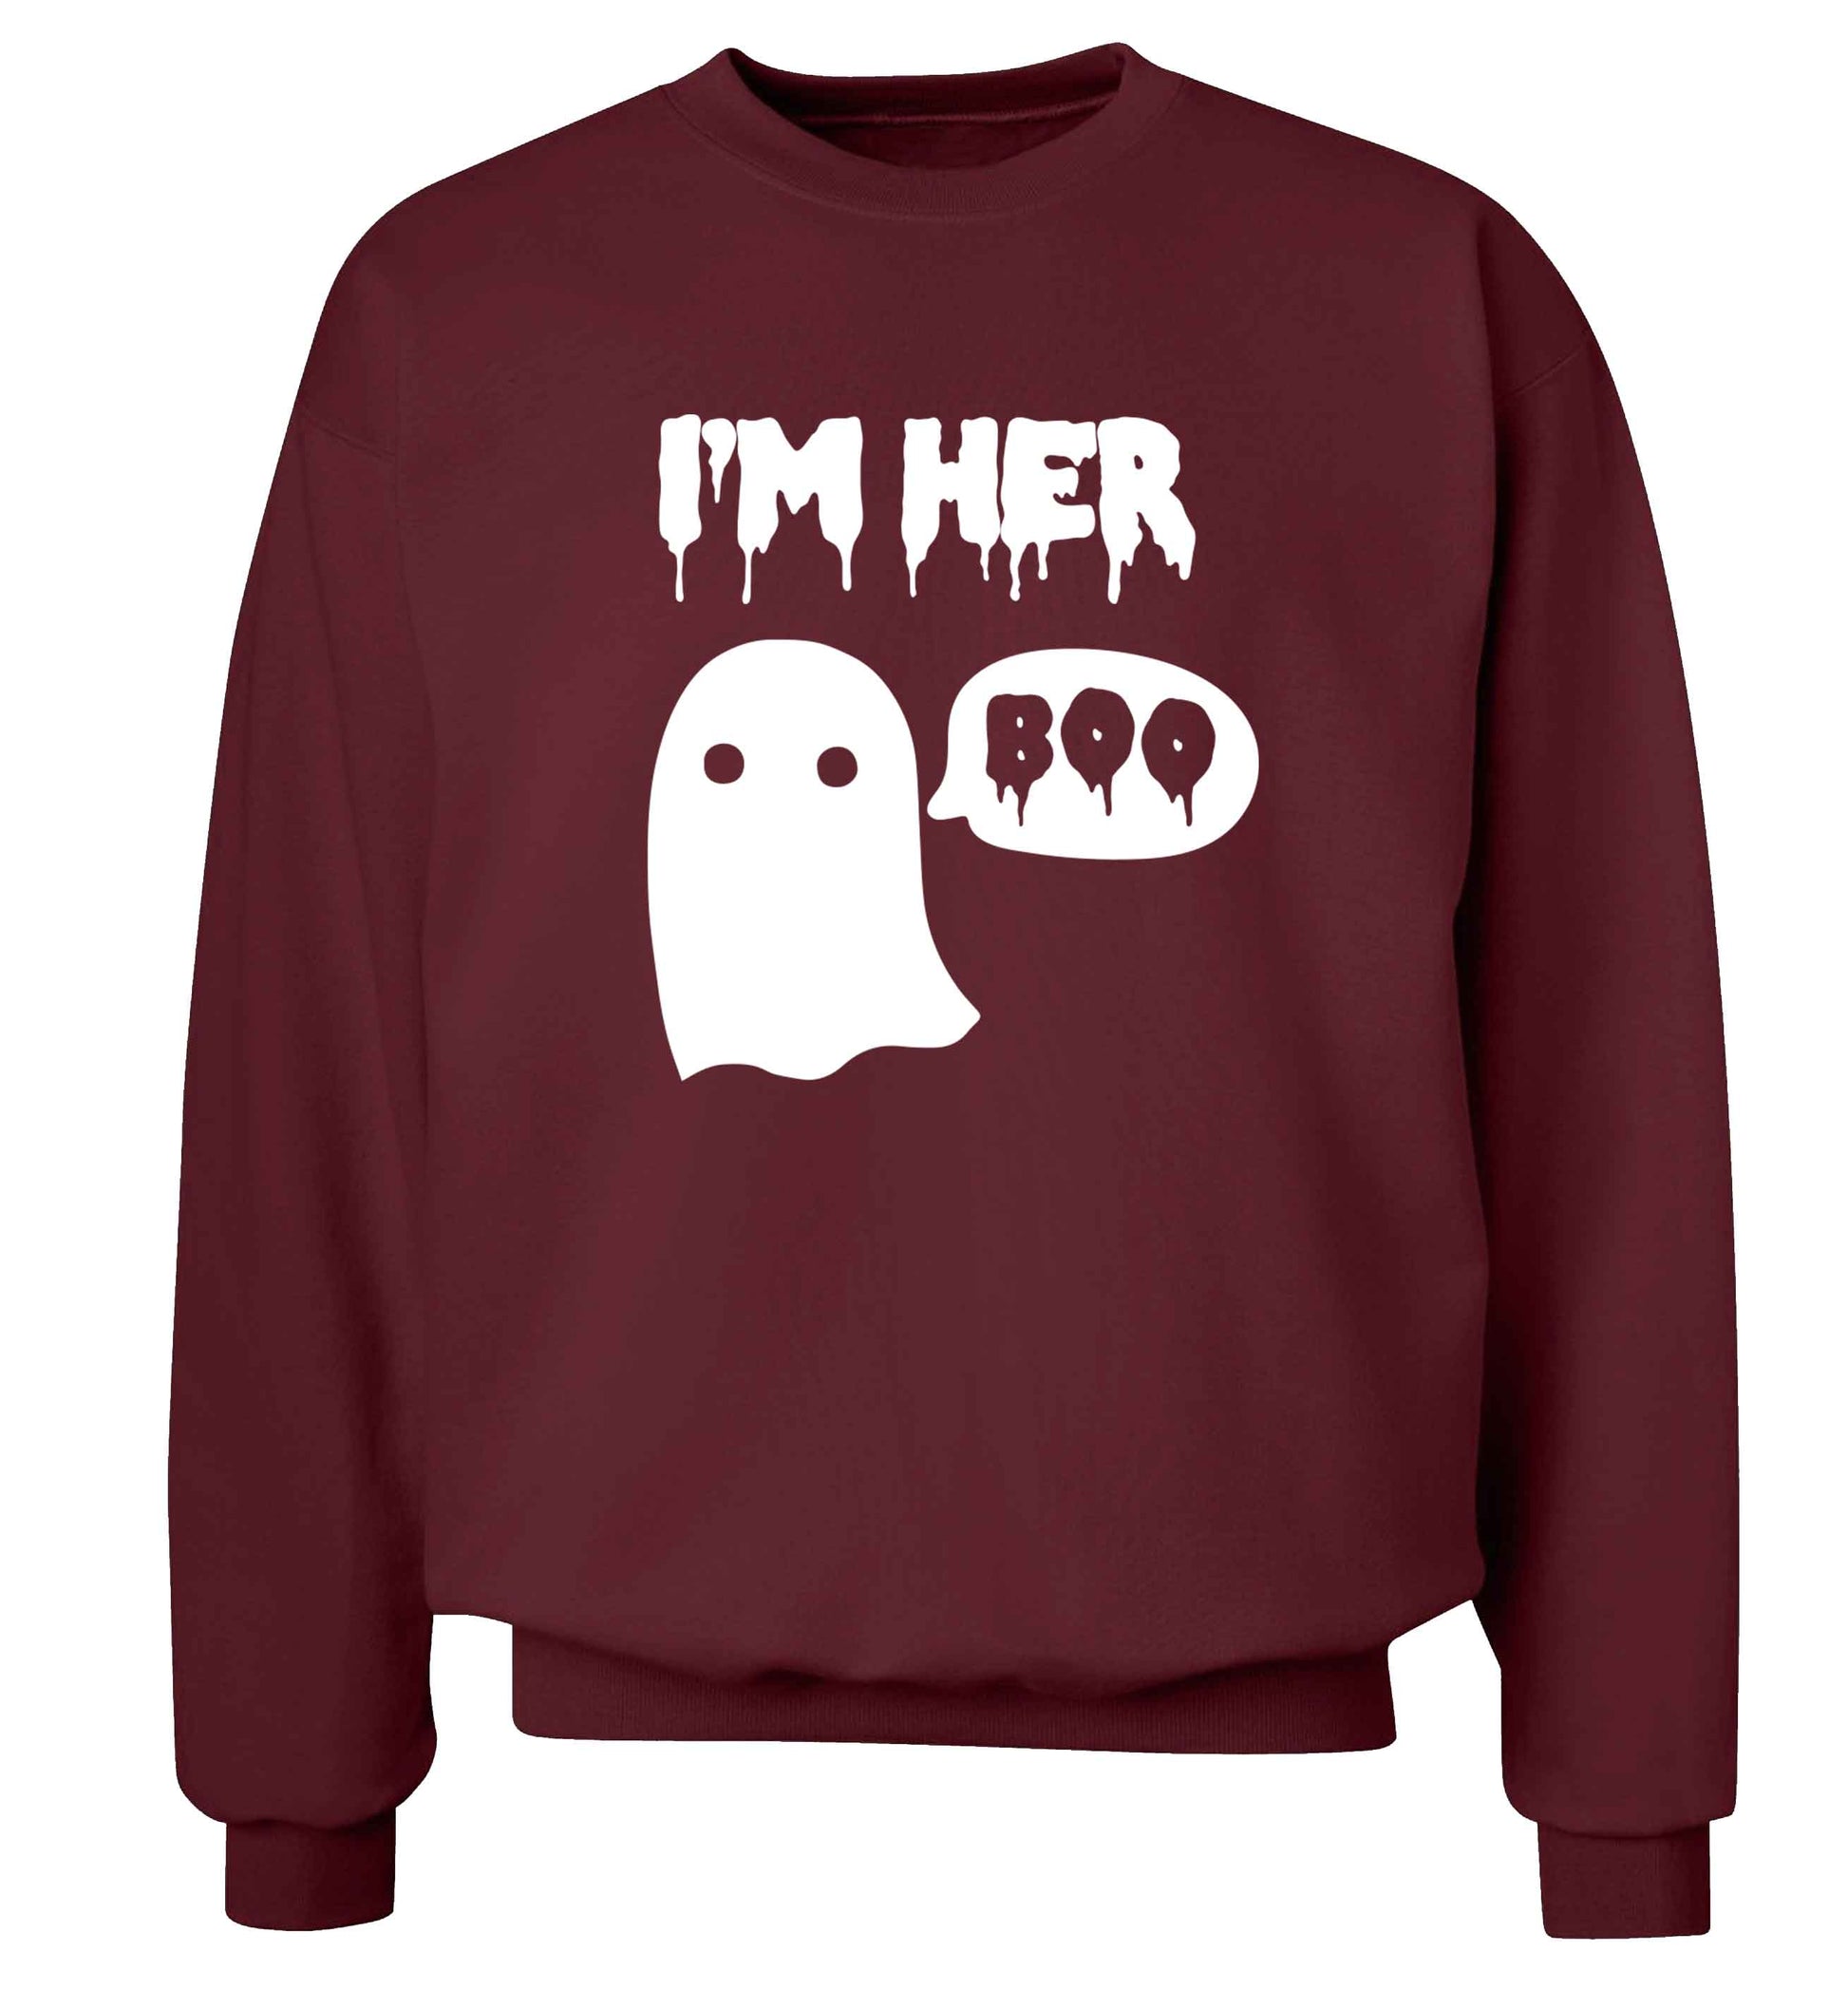 I'm her boo adult's unisex maroon sweater 2XL